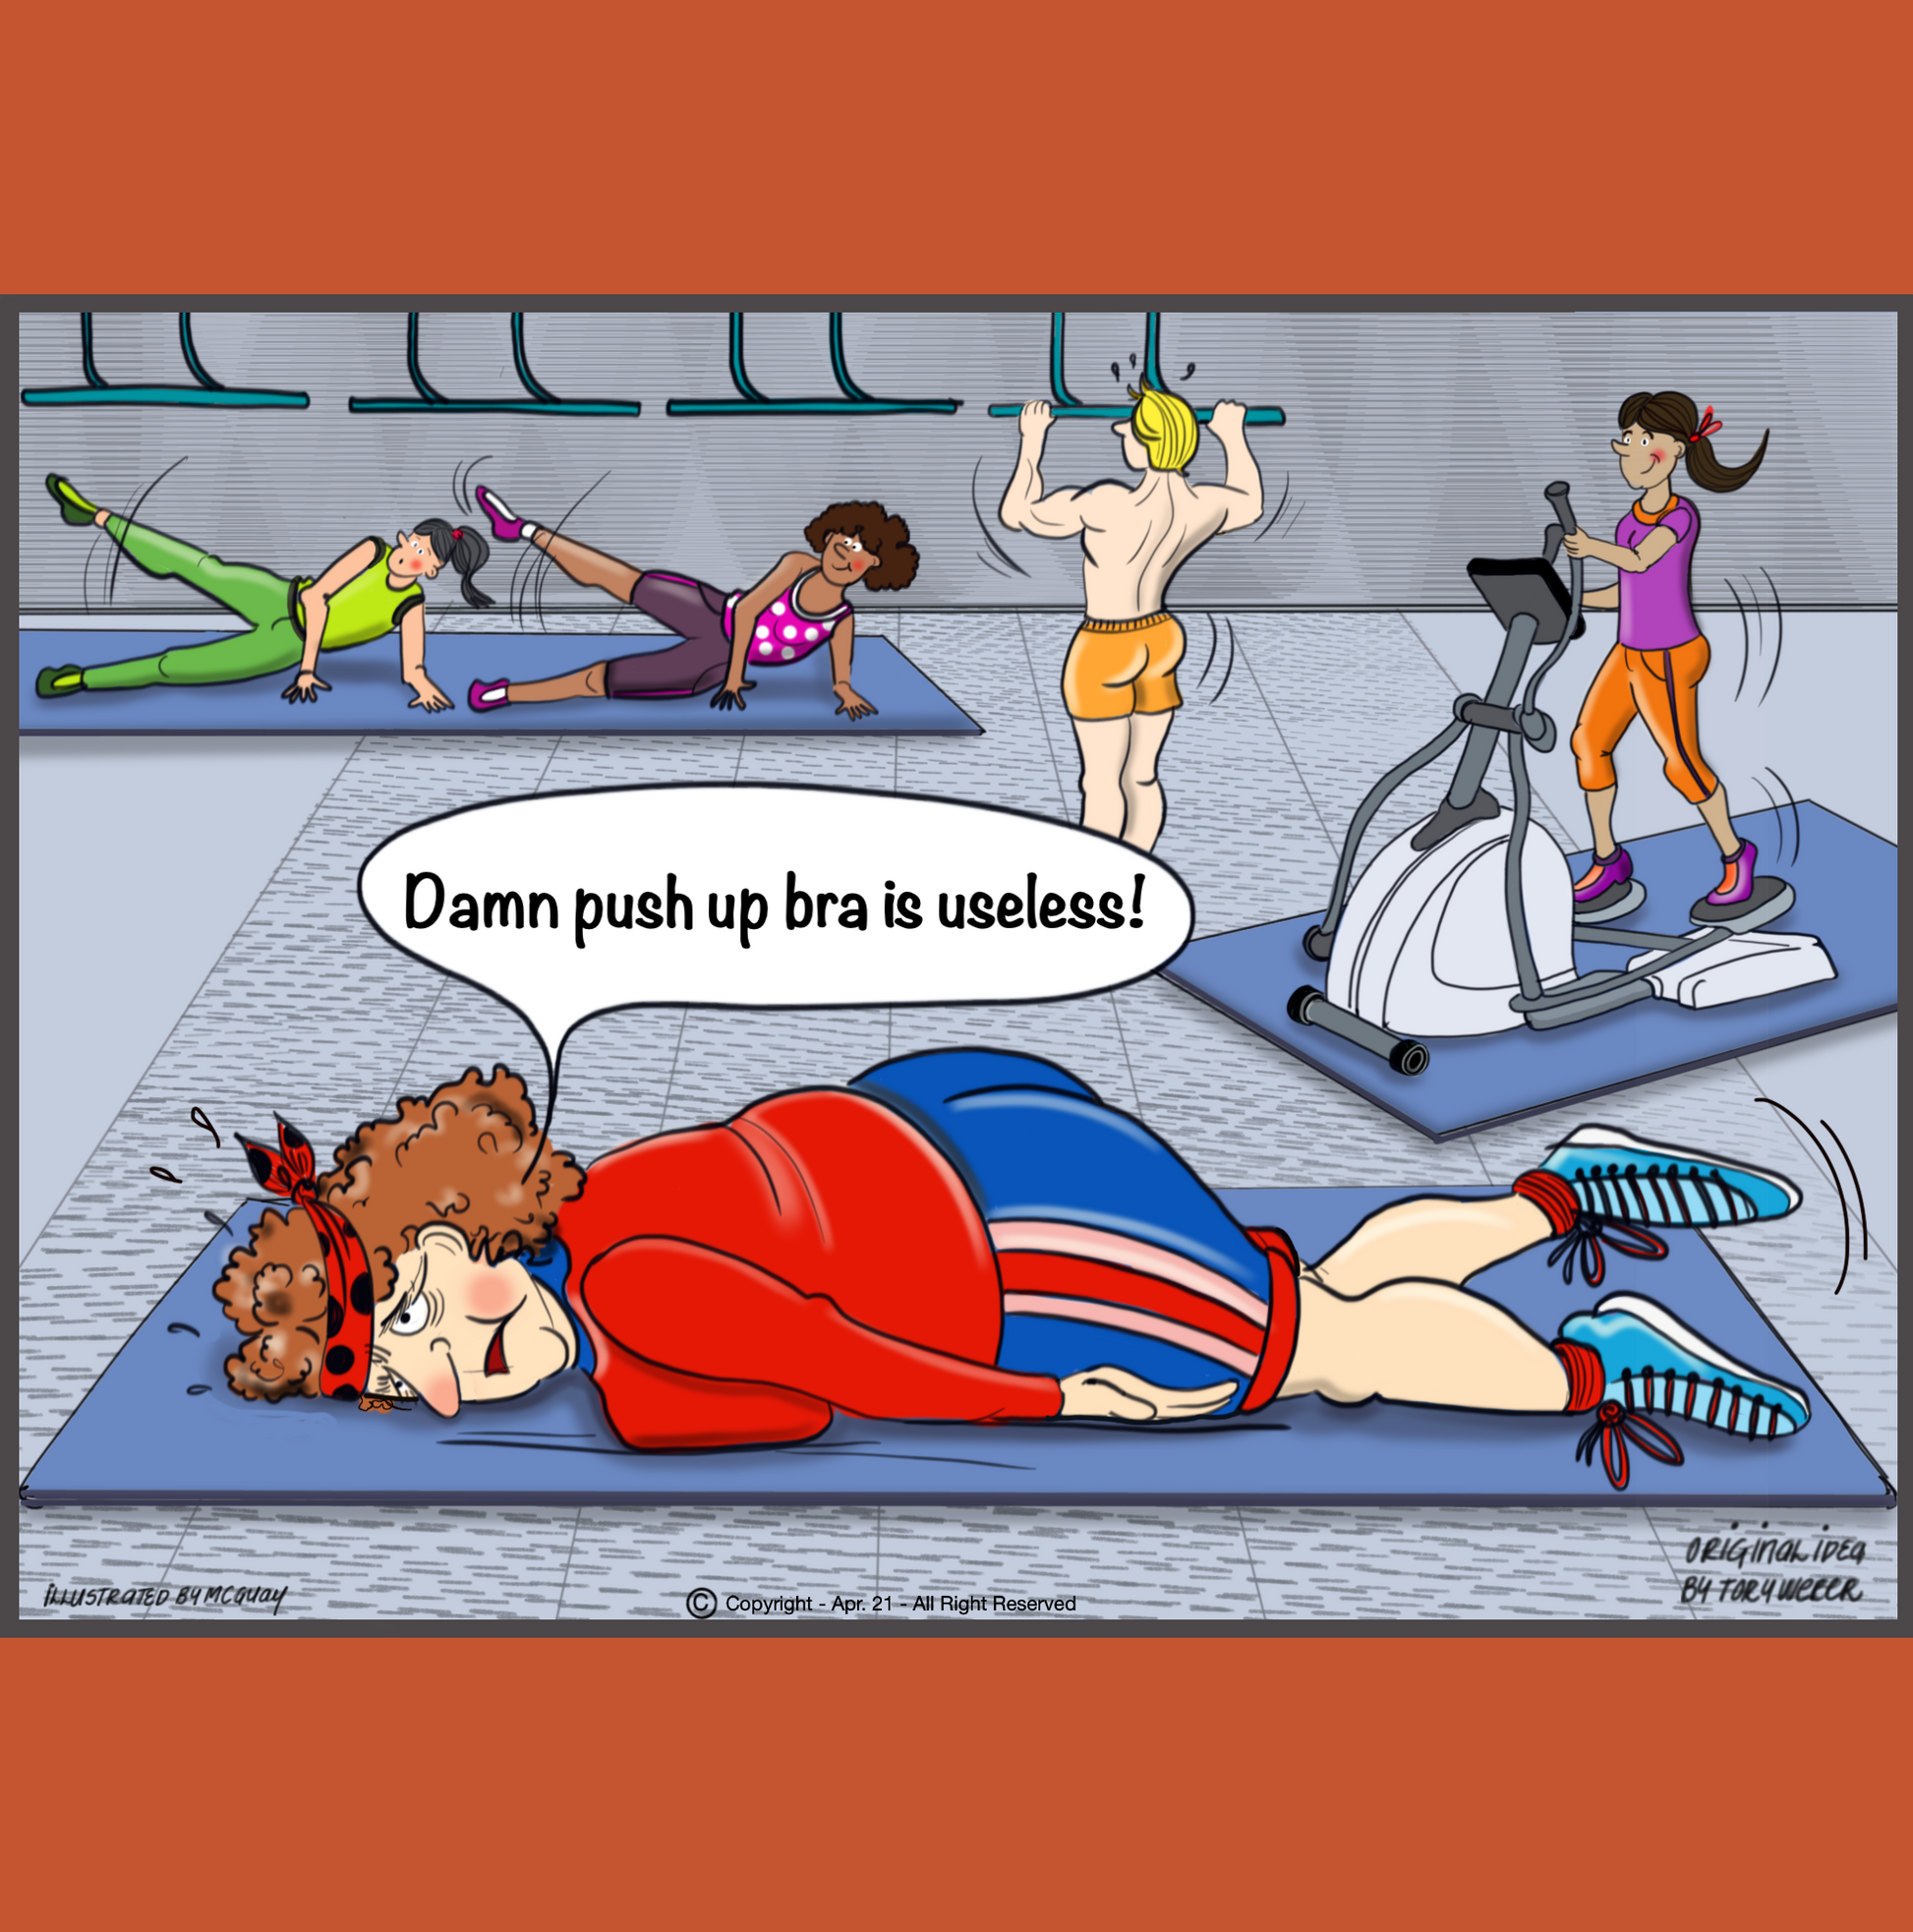 In a busy gym there are people excercising, some working out on cross trainers, others doing pilates and arobics. In the center of all this there is a plump lady wearing workout clothes including sweat pants, sneakers and a large head band. She is laying face down on a workout mat with her head turned sideways. Her arms are listlessly lying along each side of her body. She has a disgused look on her face and says, "Damn push-up bra is useless". 